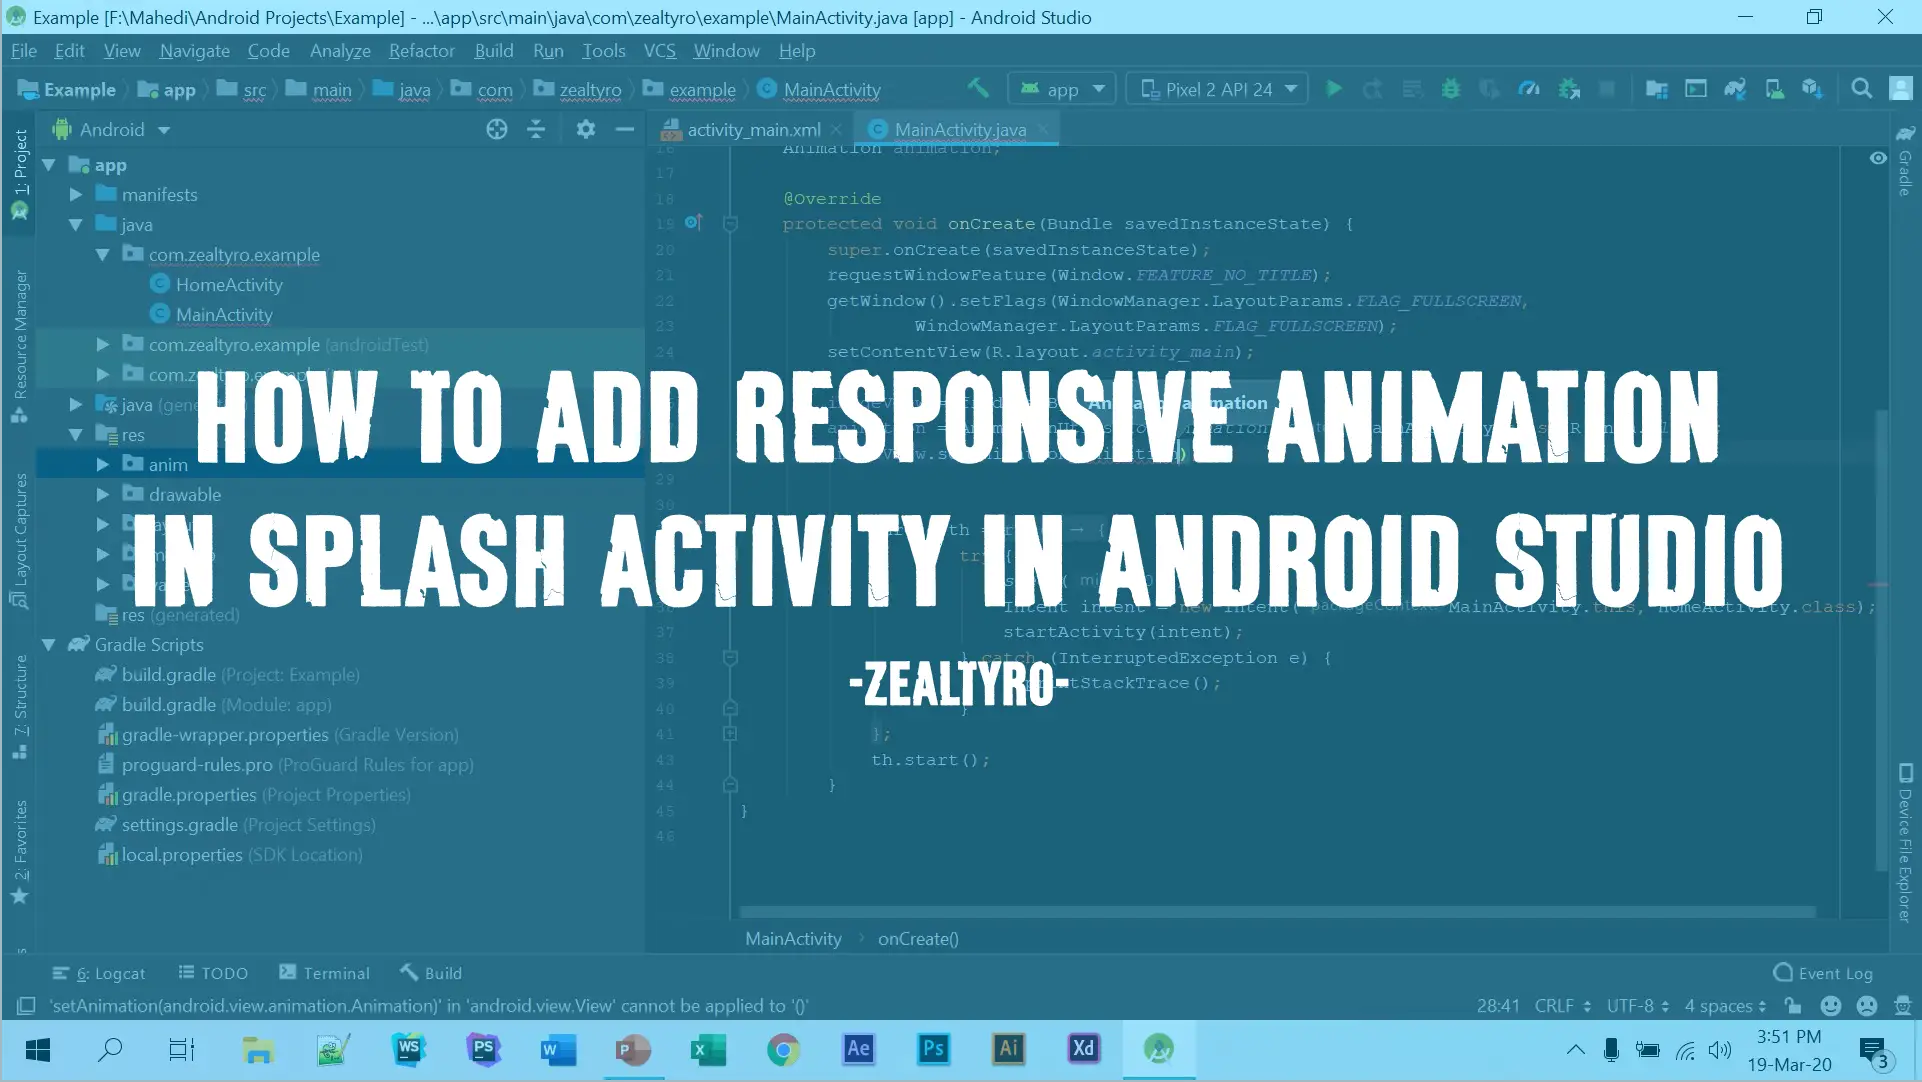 How To Add Responsive Animation In Splash Activity In Android Studio